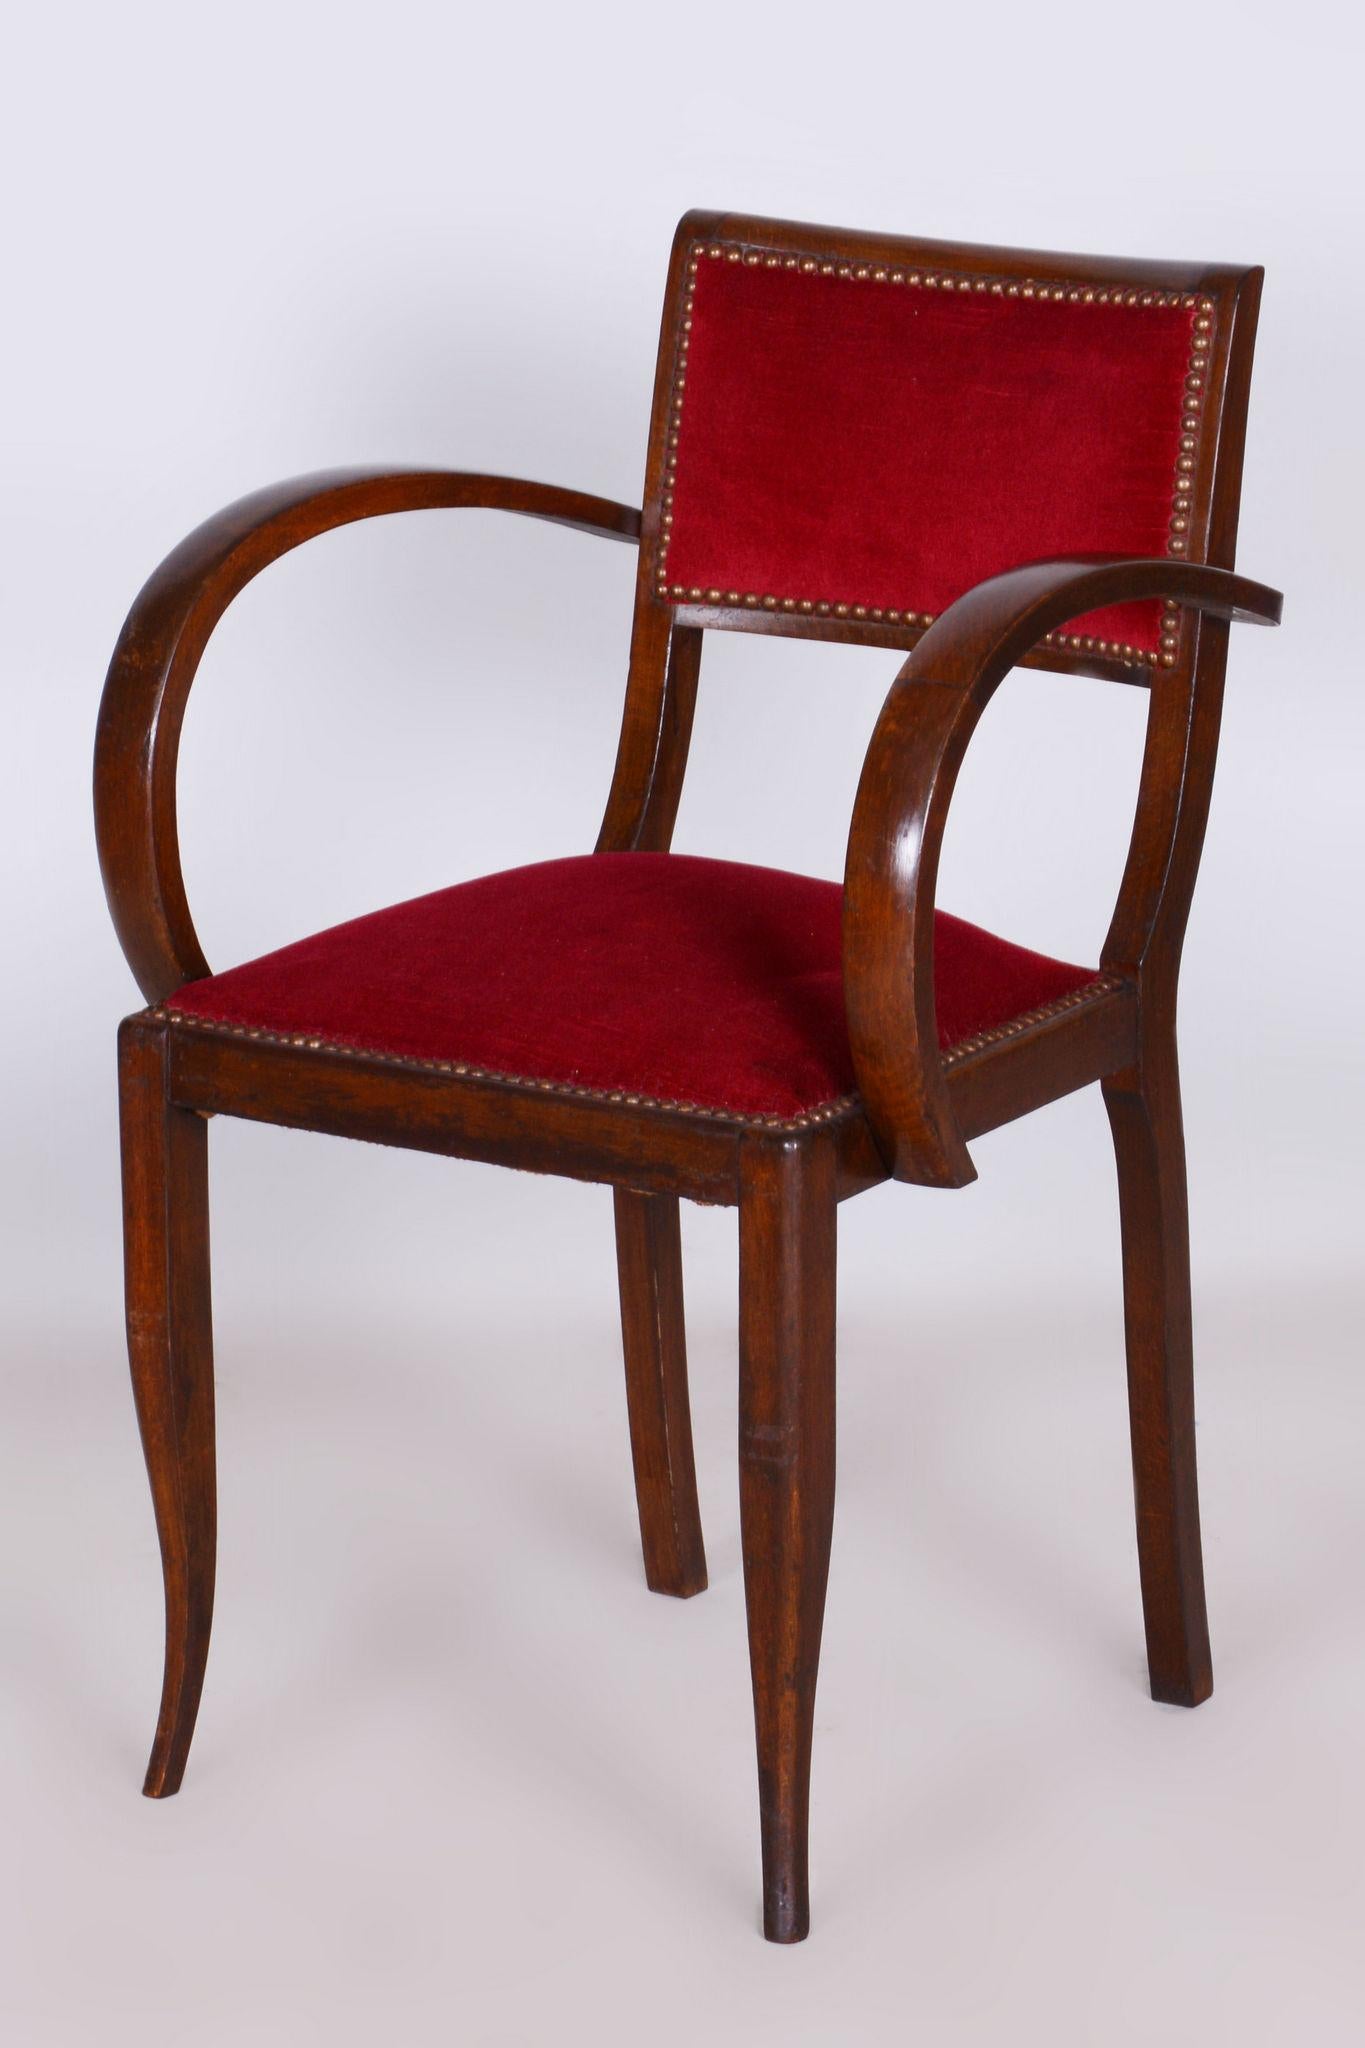 Restored beech Art Deco armchair by Jules Leleu.

Period : 1920 -1929
Source : France

Designed by Jules Leleu, a French designer at the top of French 20th Century decoration who distinguished himself during the Art Deco style's renaissance.		

This